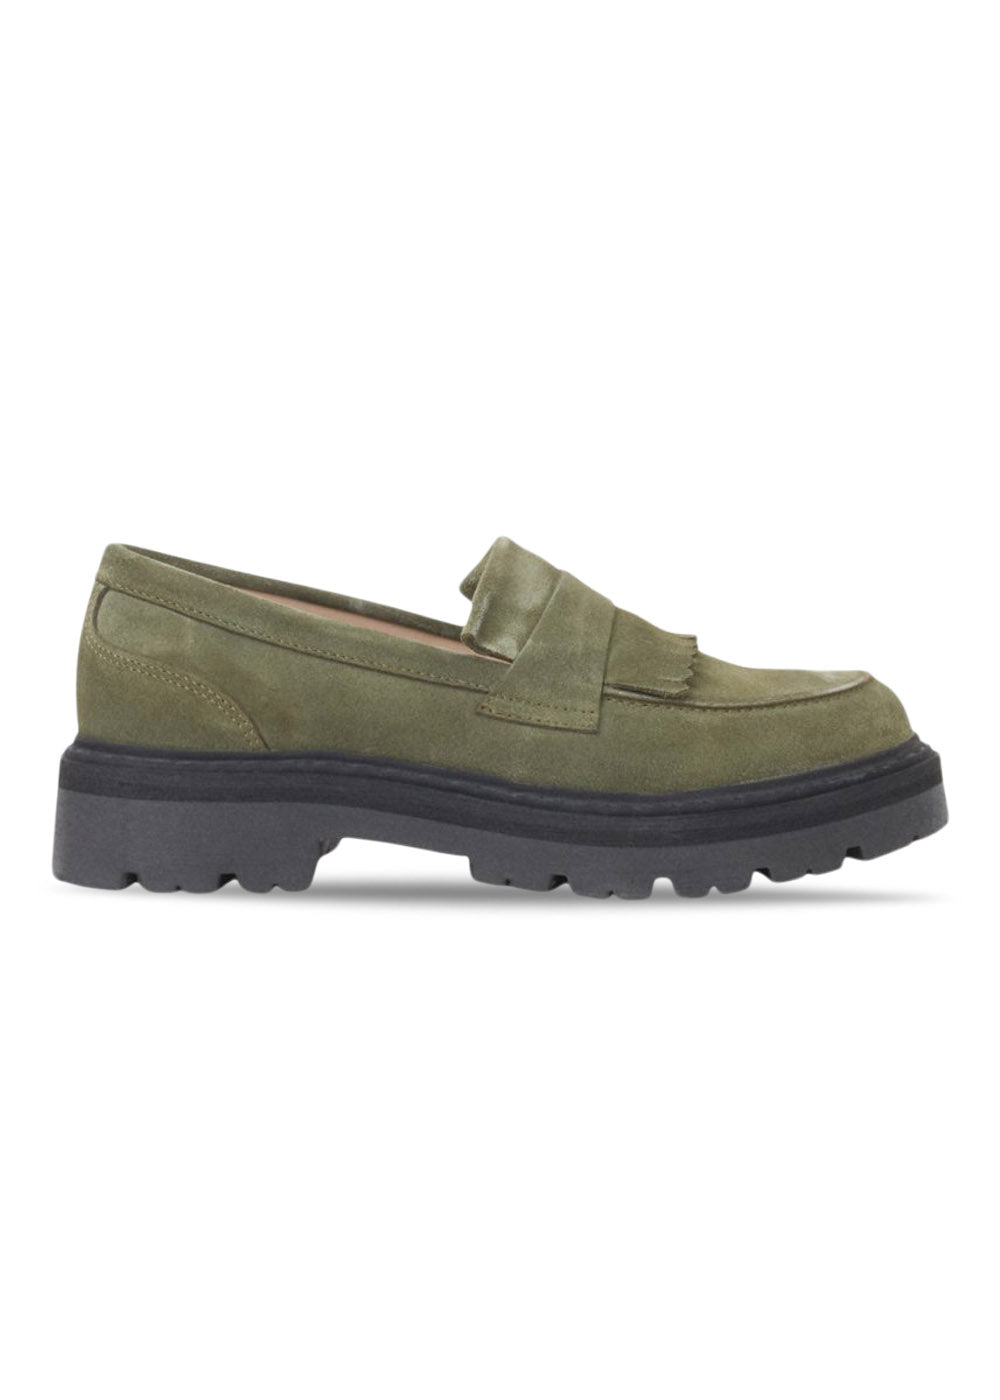 Garment Projects Spike Loafer - Army Suede - Army. Køb sko her.